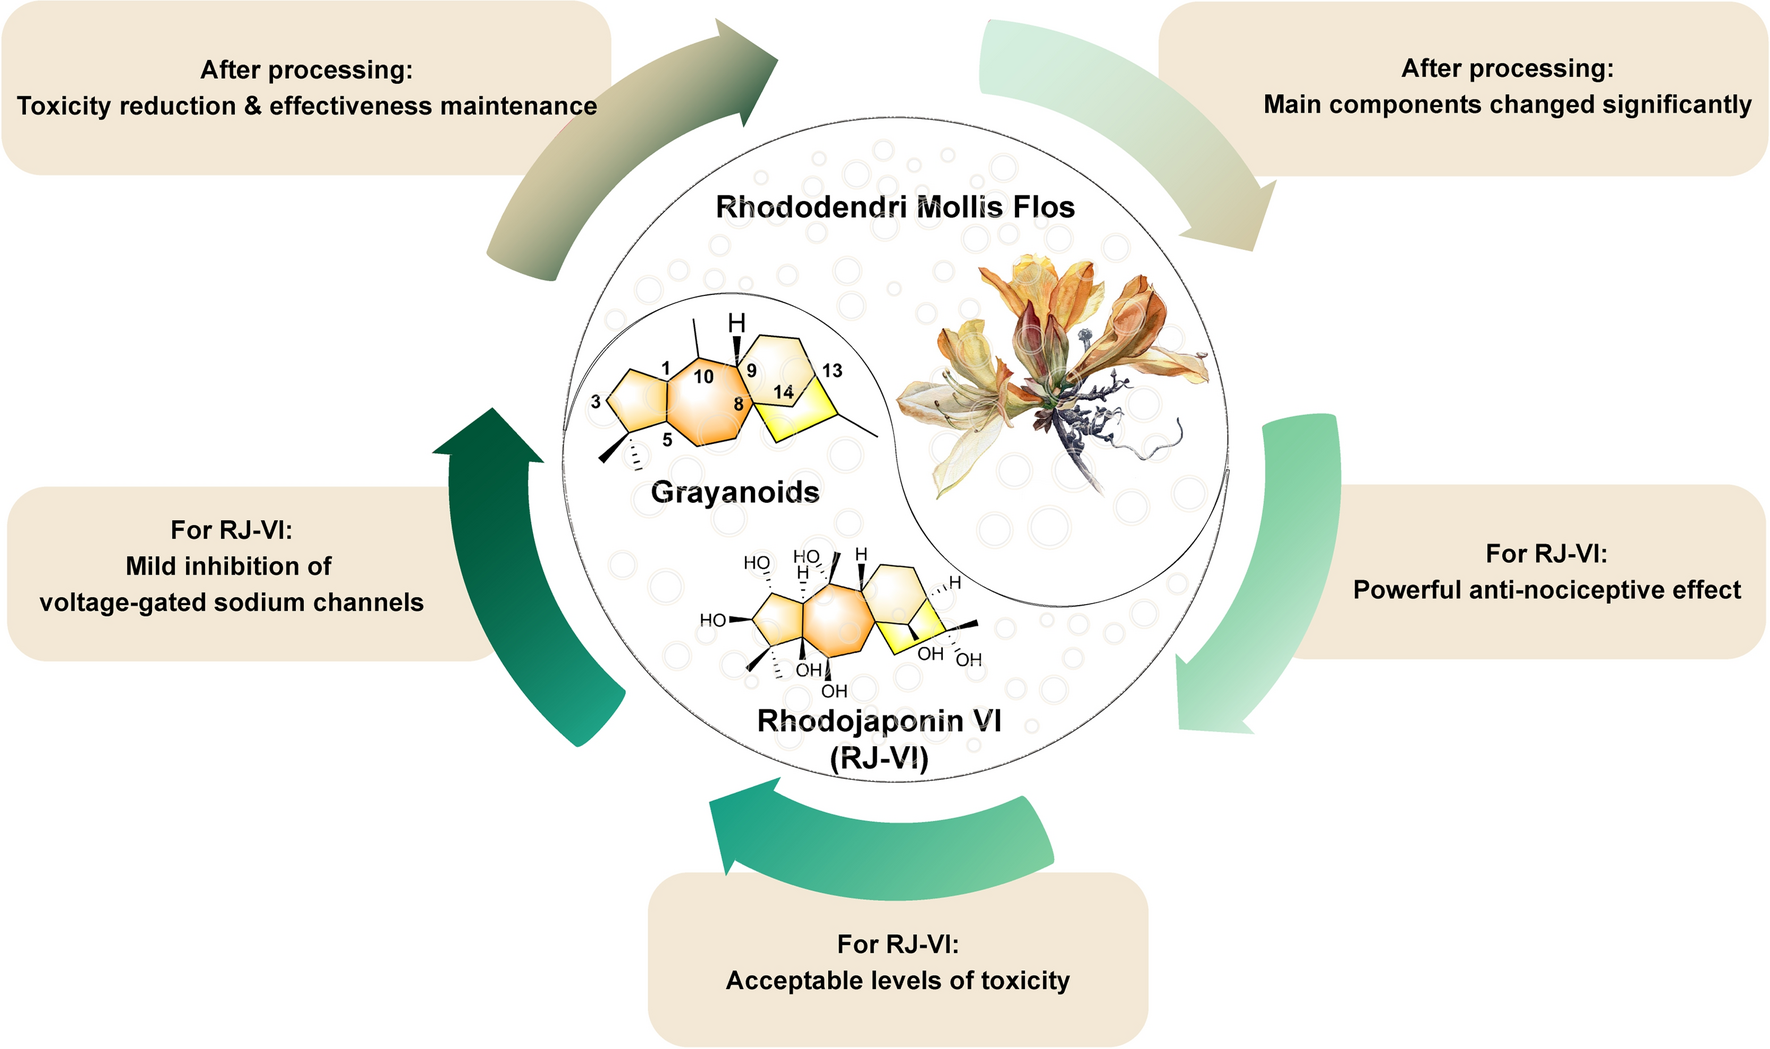 Evaluation of Rhododendri Mollis Flos and its representative component as a potential analgesic